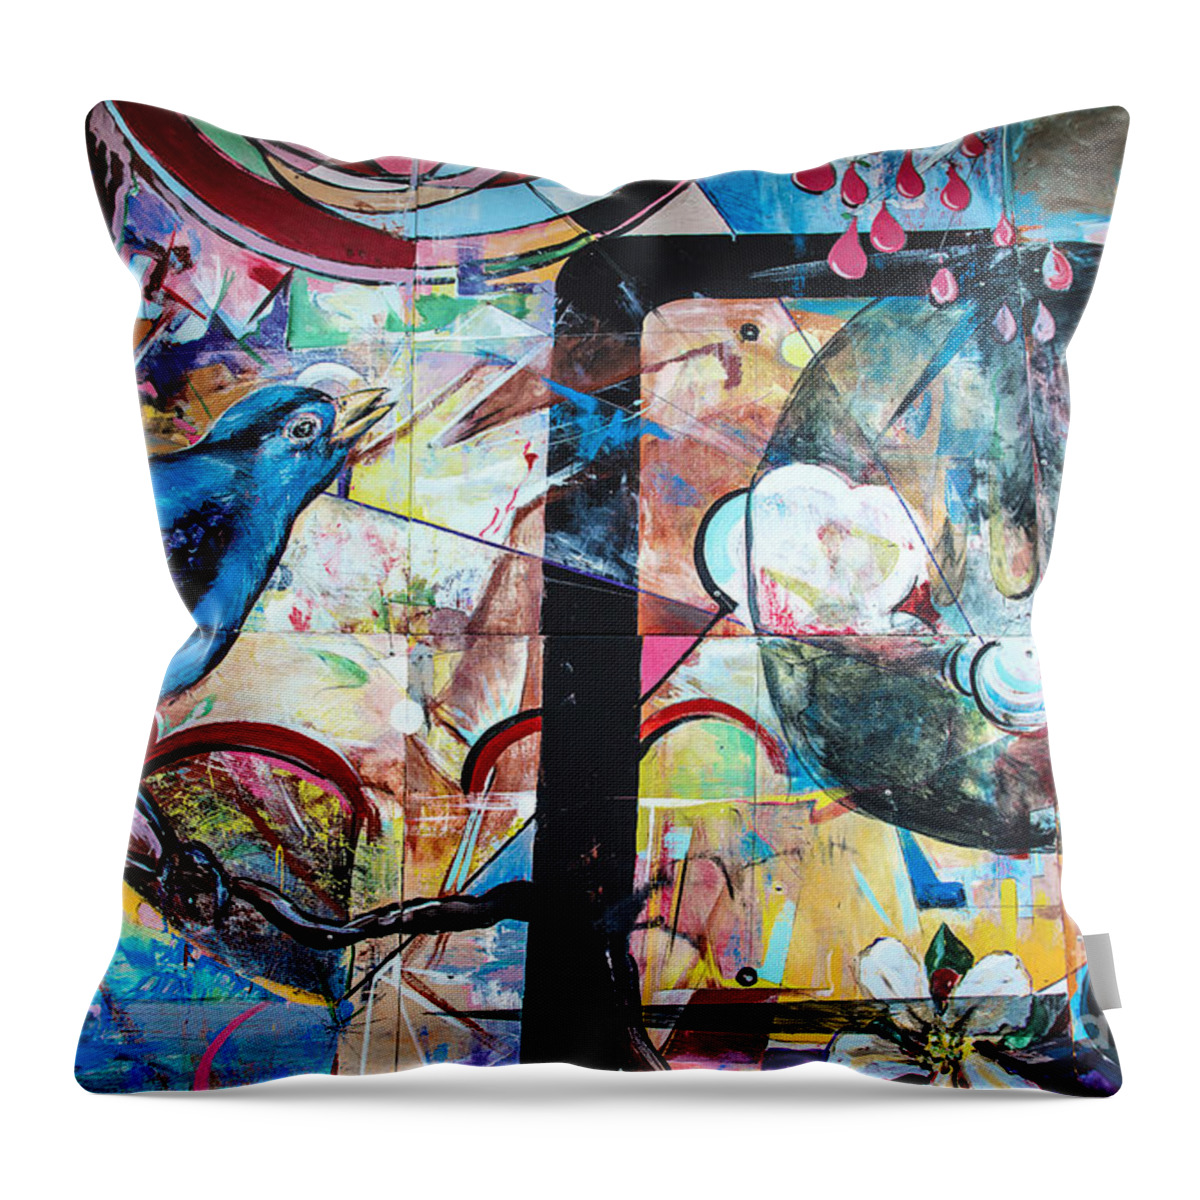 Mural Throw Pillow featuring the mixed media Bluebird Sings by Terry Rowe